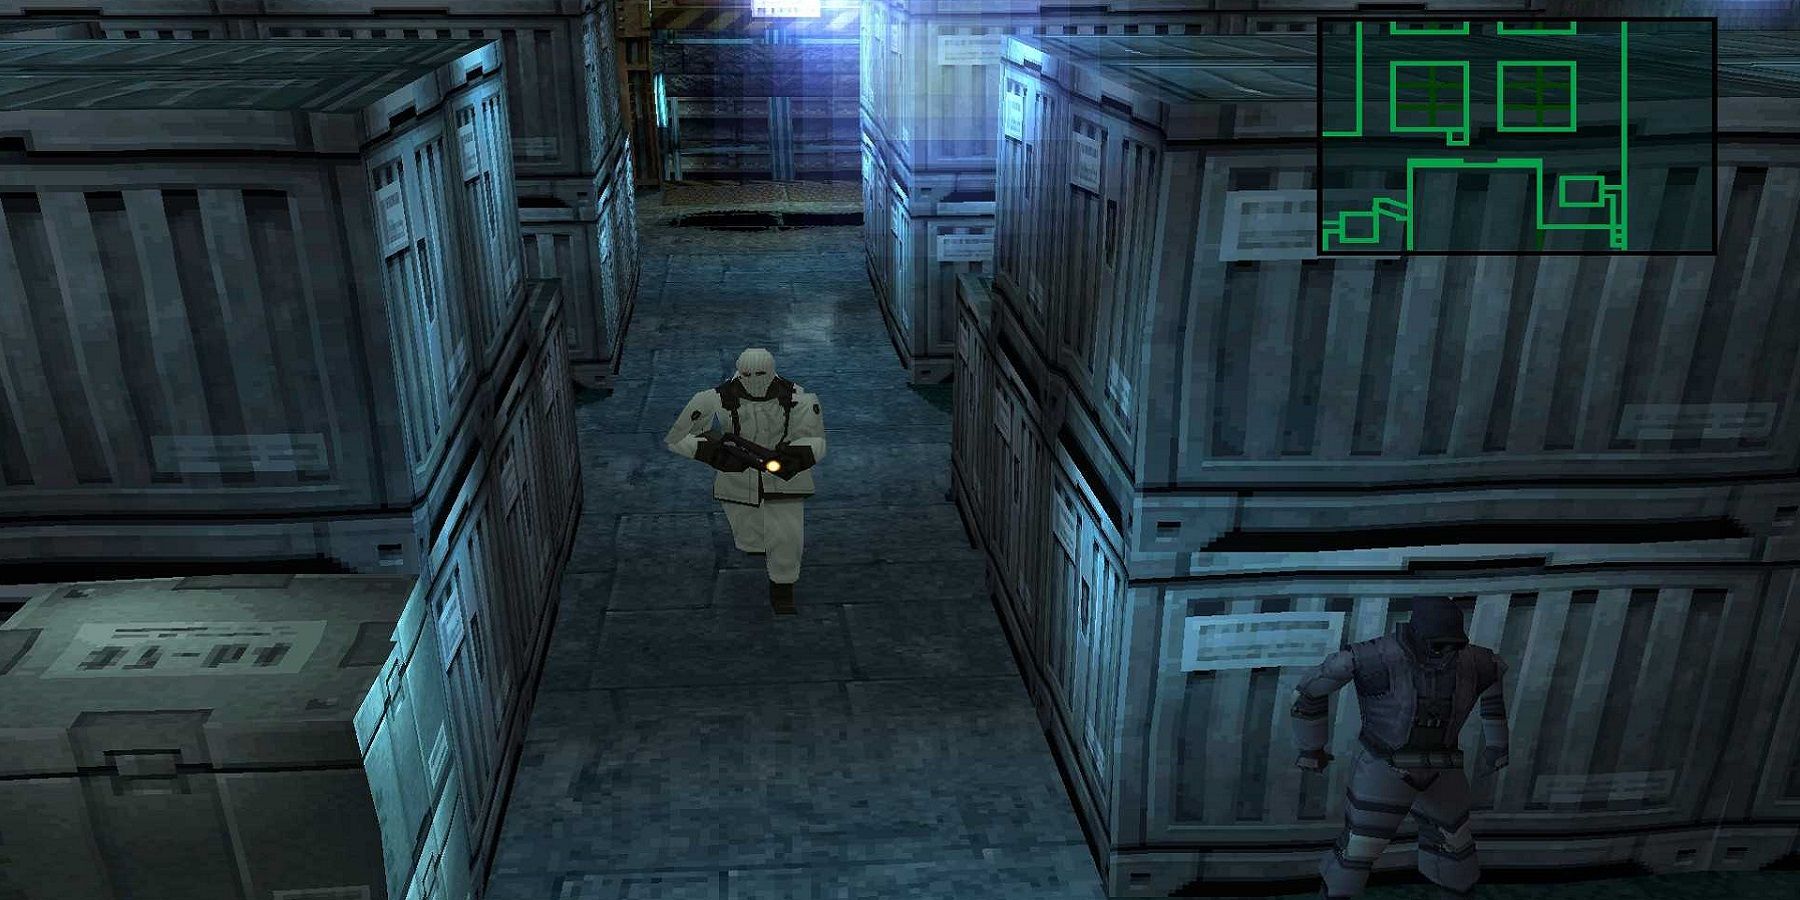 Image from Metal Gear Solid showing Solid Snake hiding from a patrolling guard.